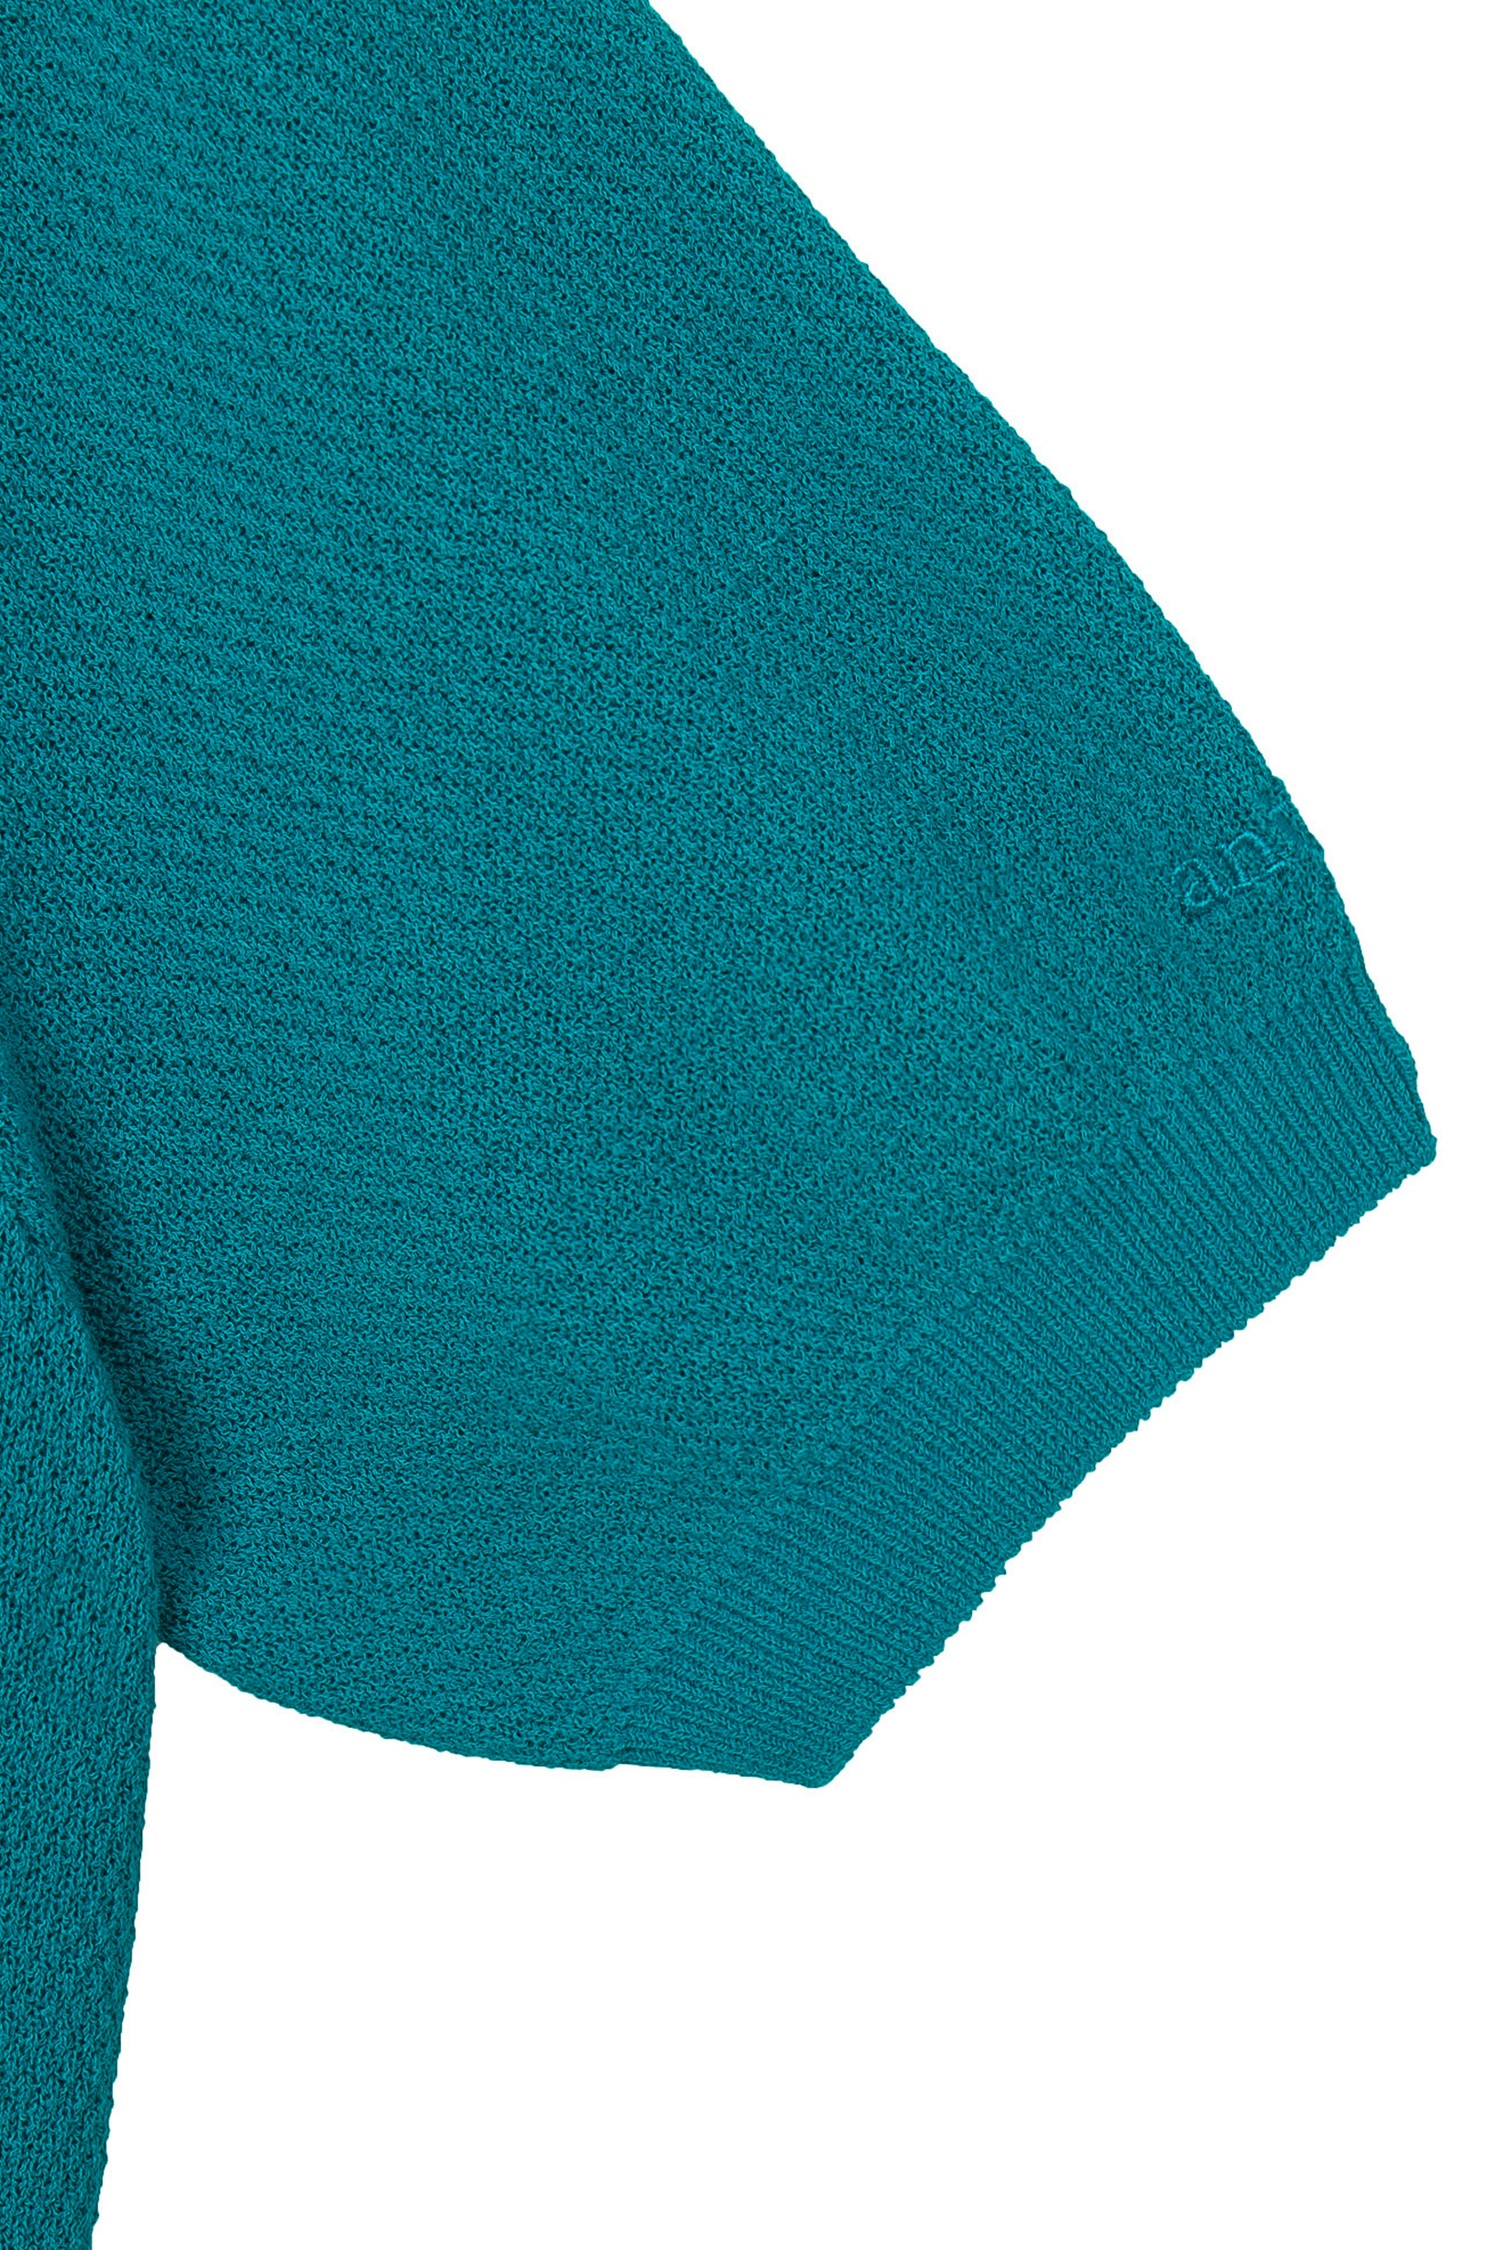 VACATION KNIT BUTTON POLO Men - Teal